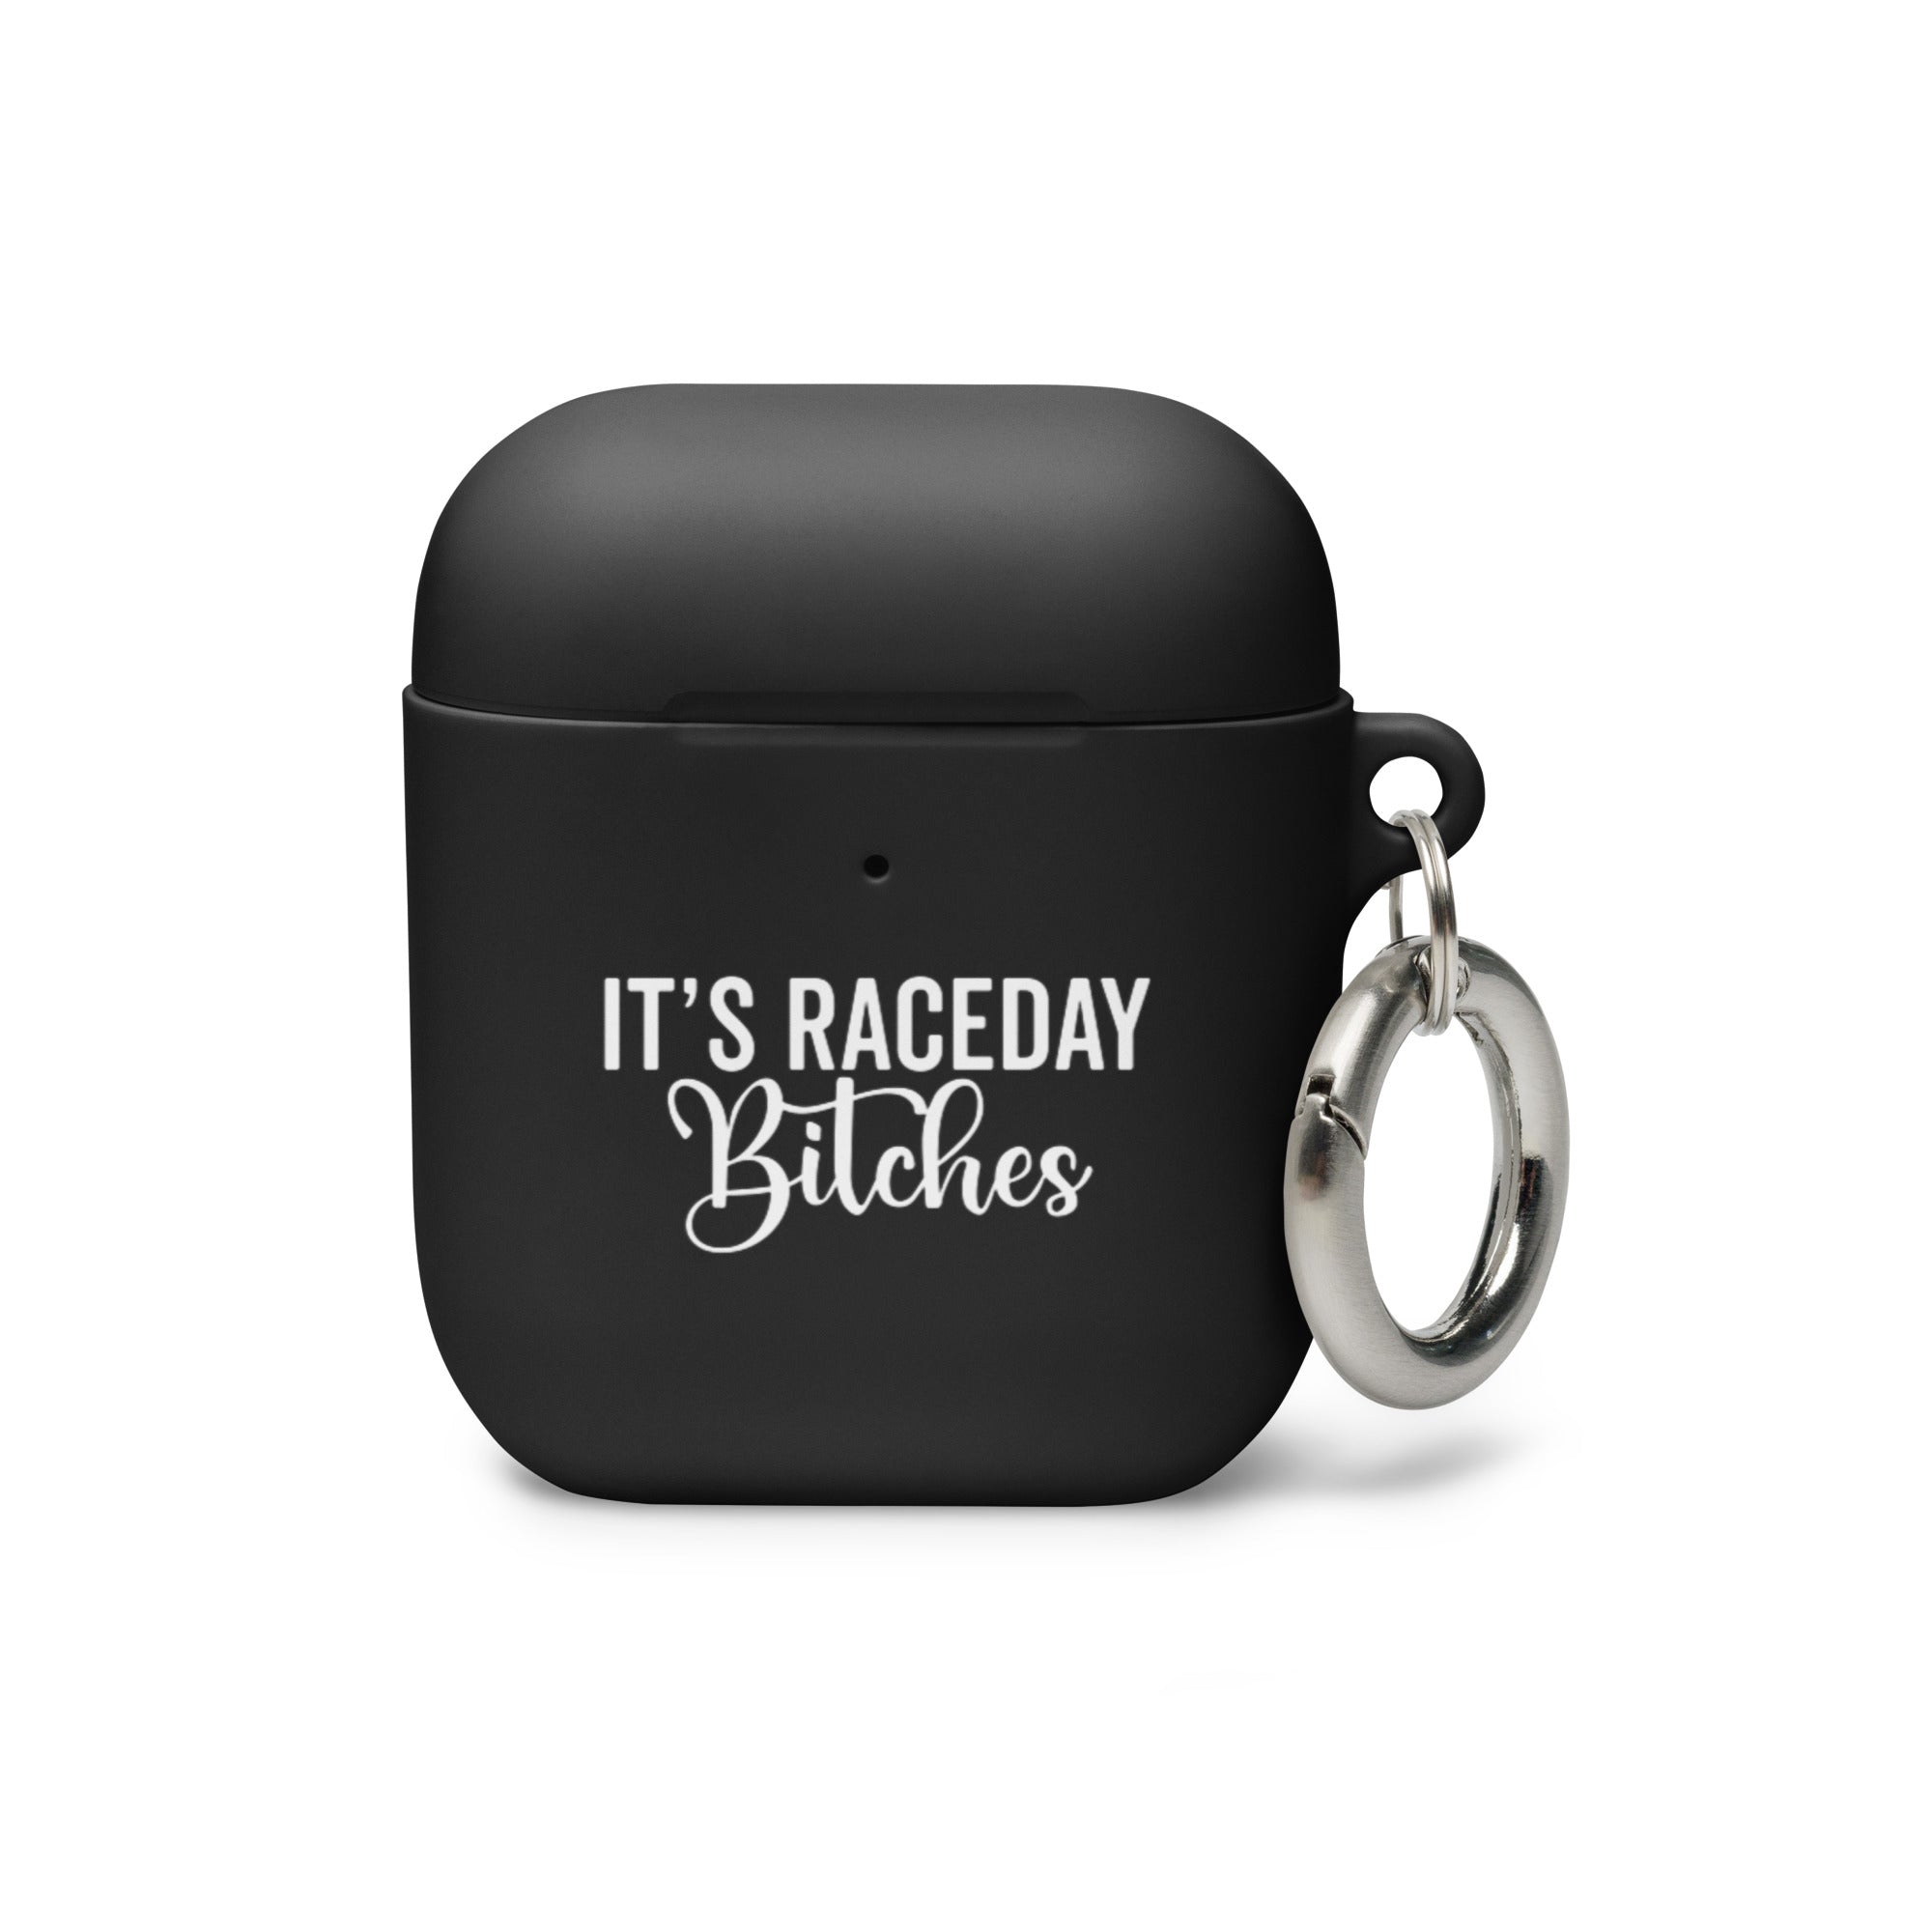 It’s Raceday Bitches AirPods case